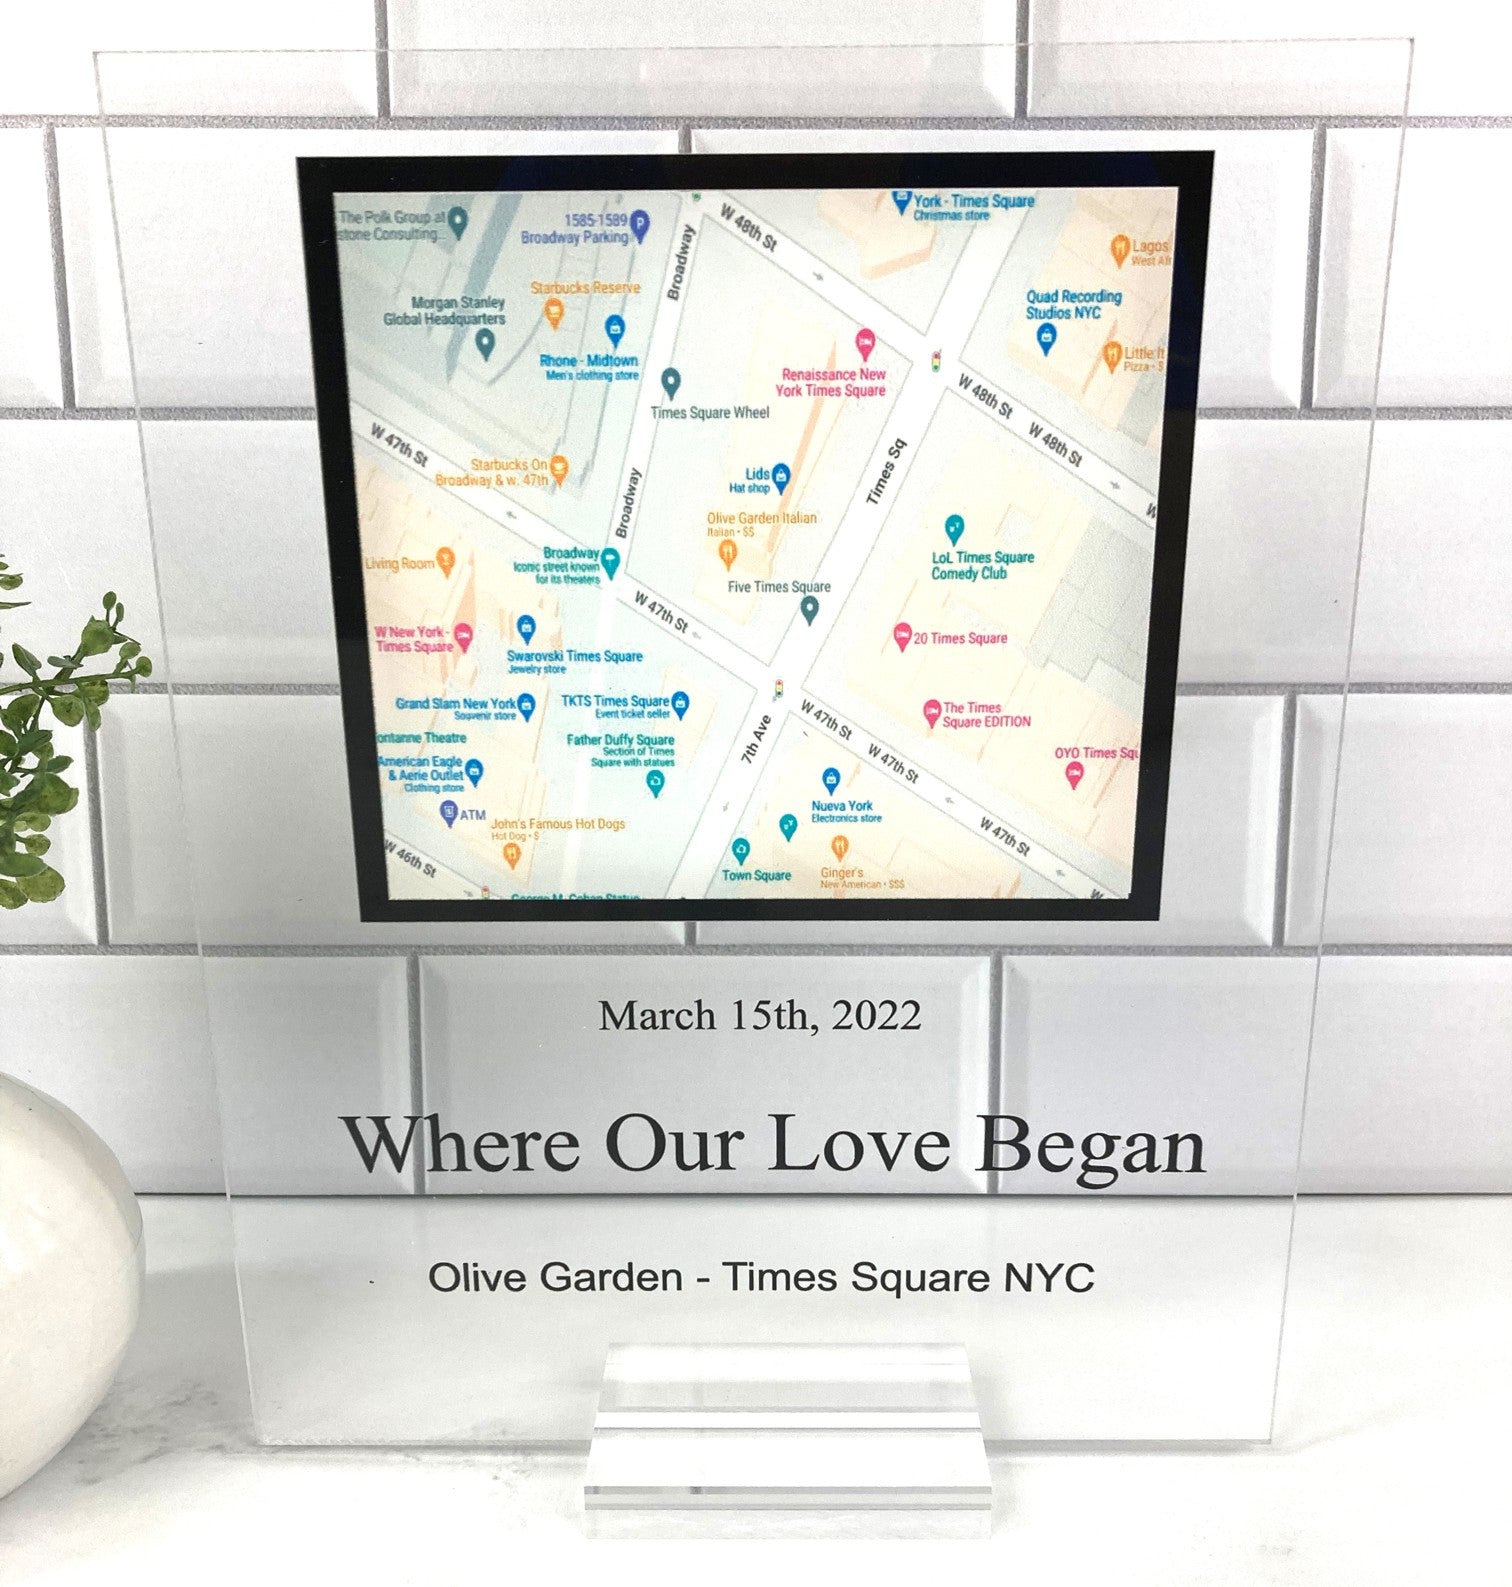 Custom Map Plaque Where We Met Wedding anniversary Our First Date Map  Couples Gift Engagement Gifts Acrylic Plaque CMP01 